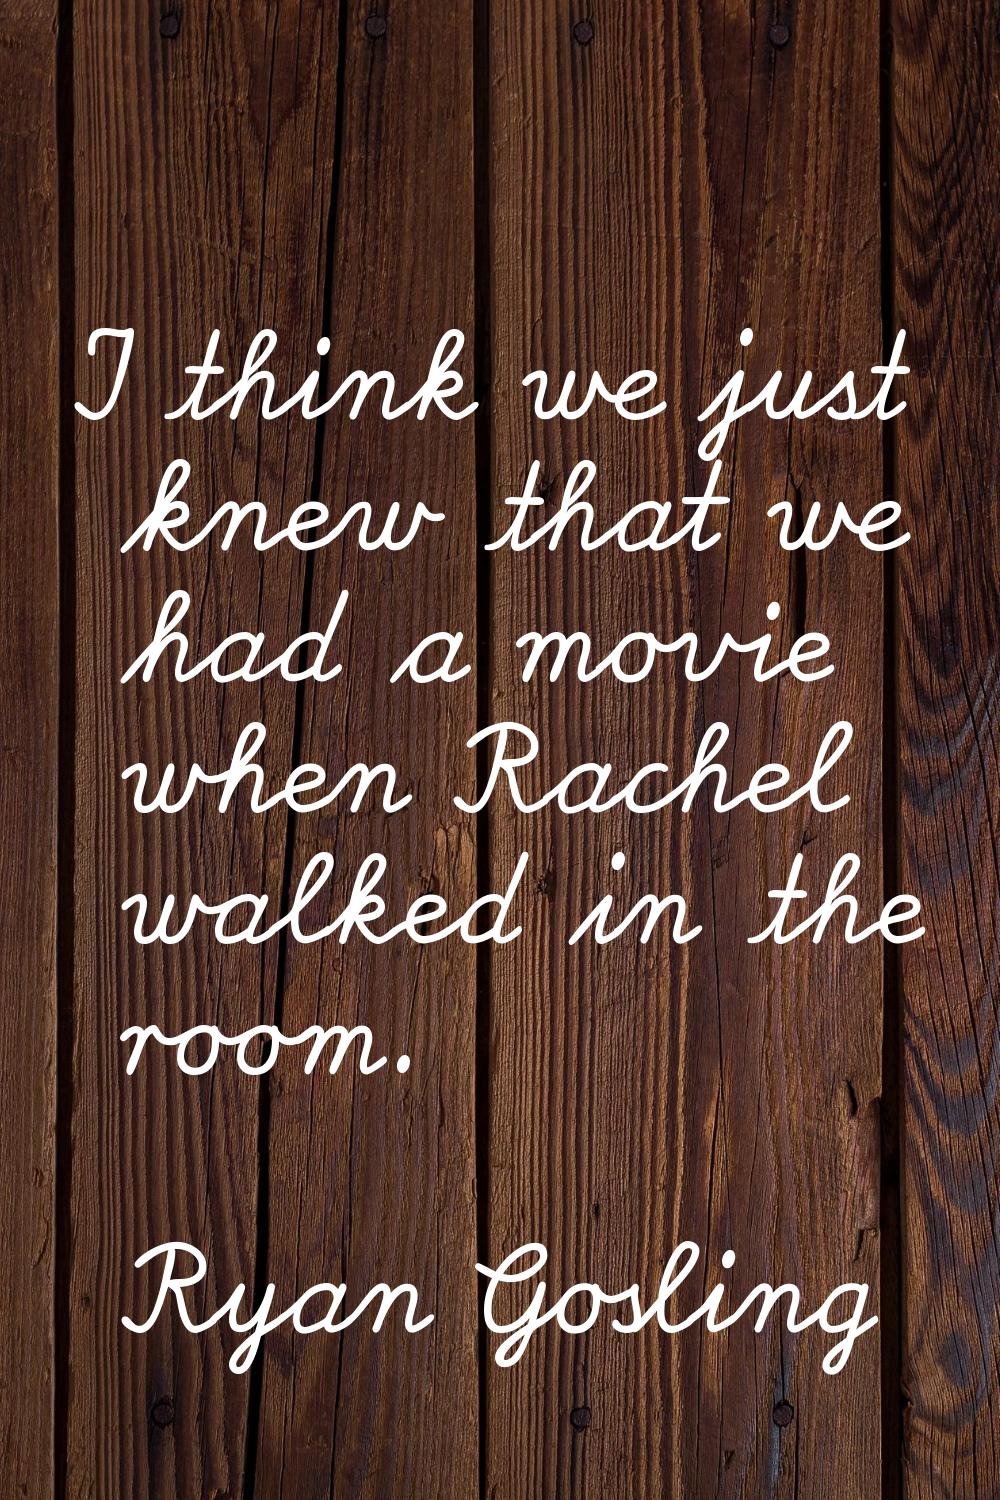 I think we just knew that we had a movie when Rachel walked in the room.